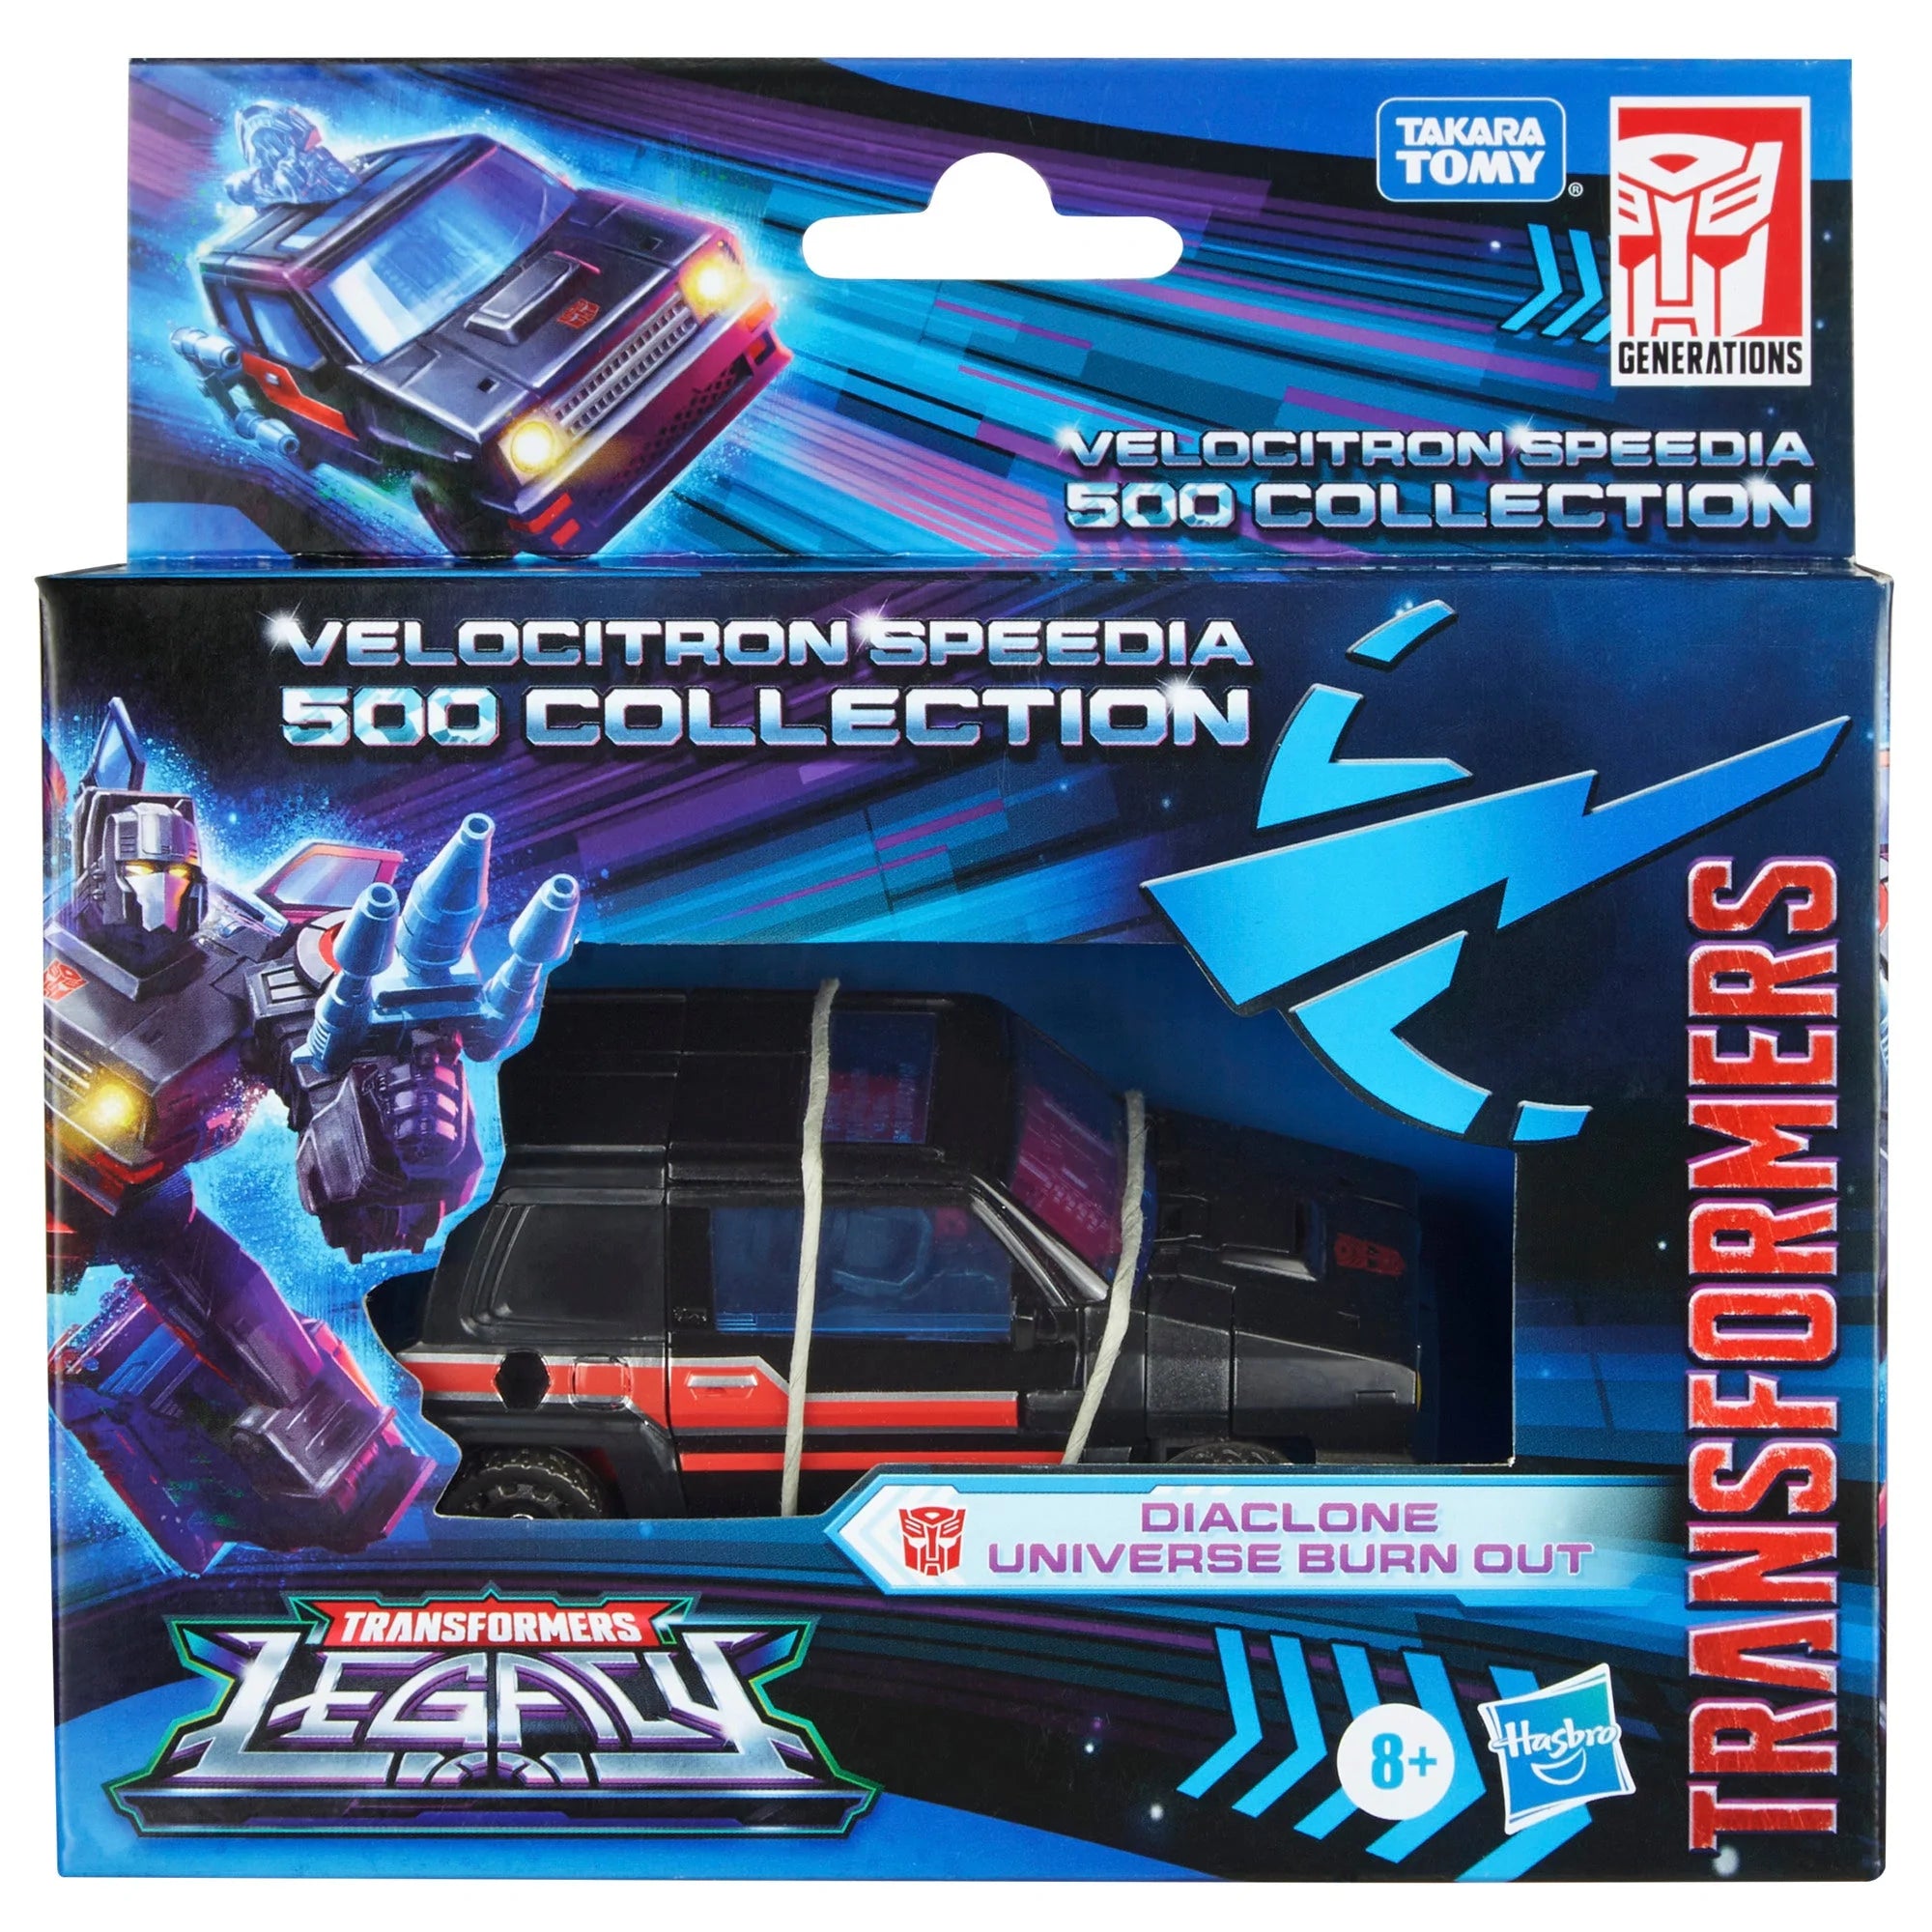 Transformers Legacy Velocitron Speedia 500 Collection Deluxe Class Diaclone Universe Burn Out Action Figure